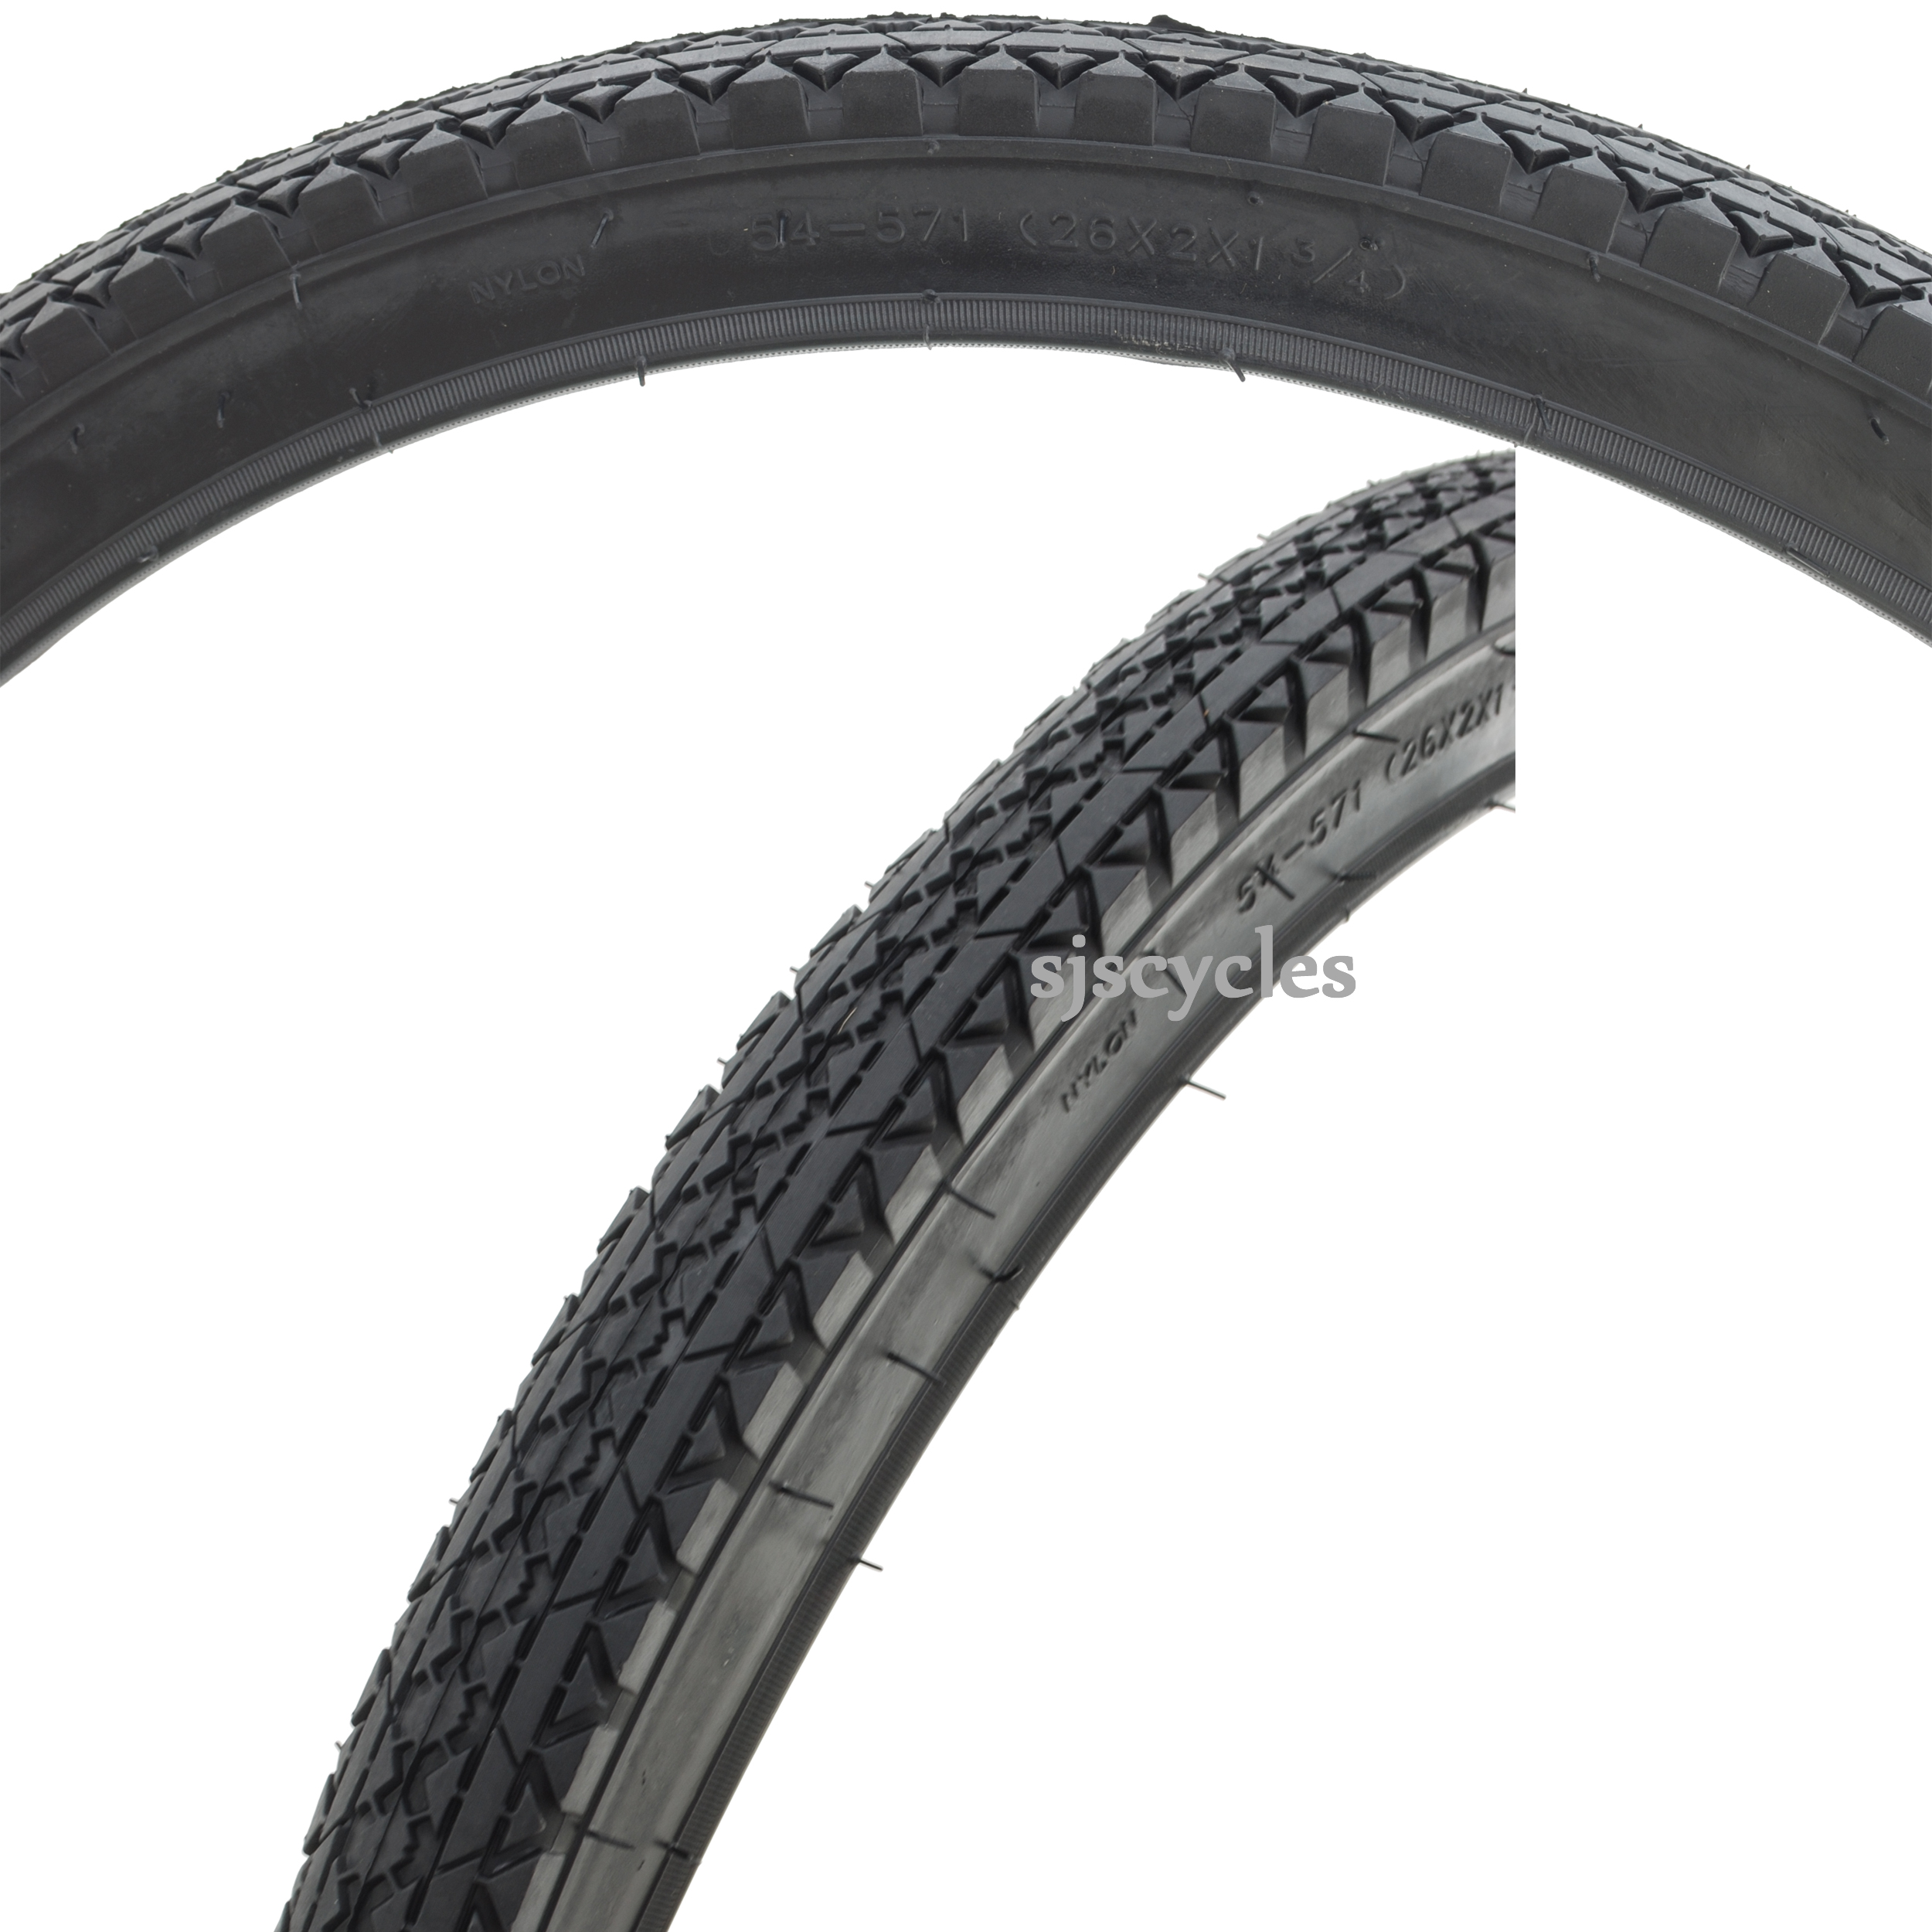 26 inch cycle tyre price